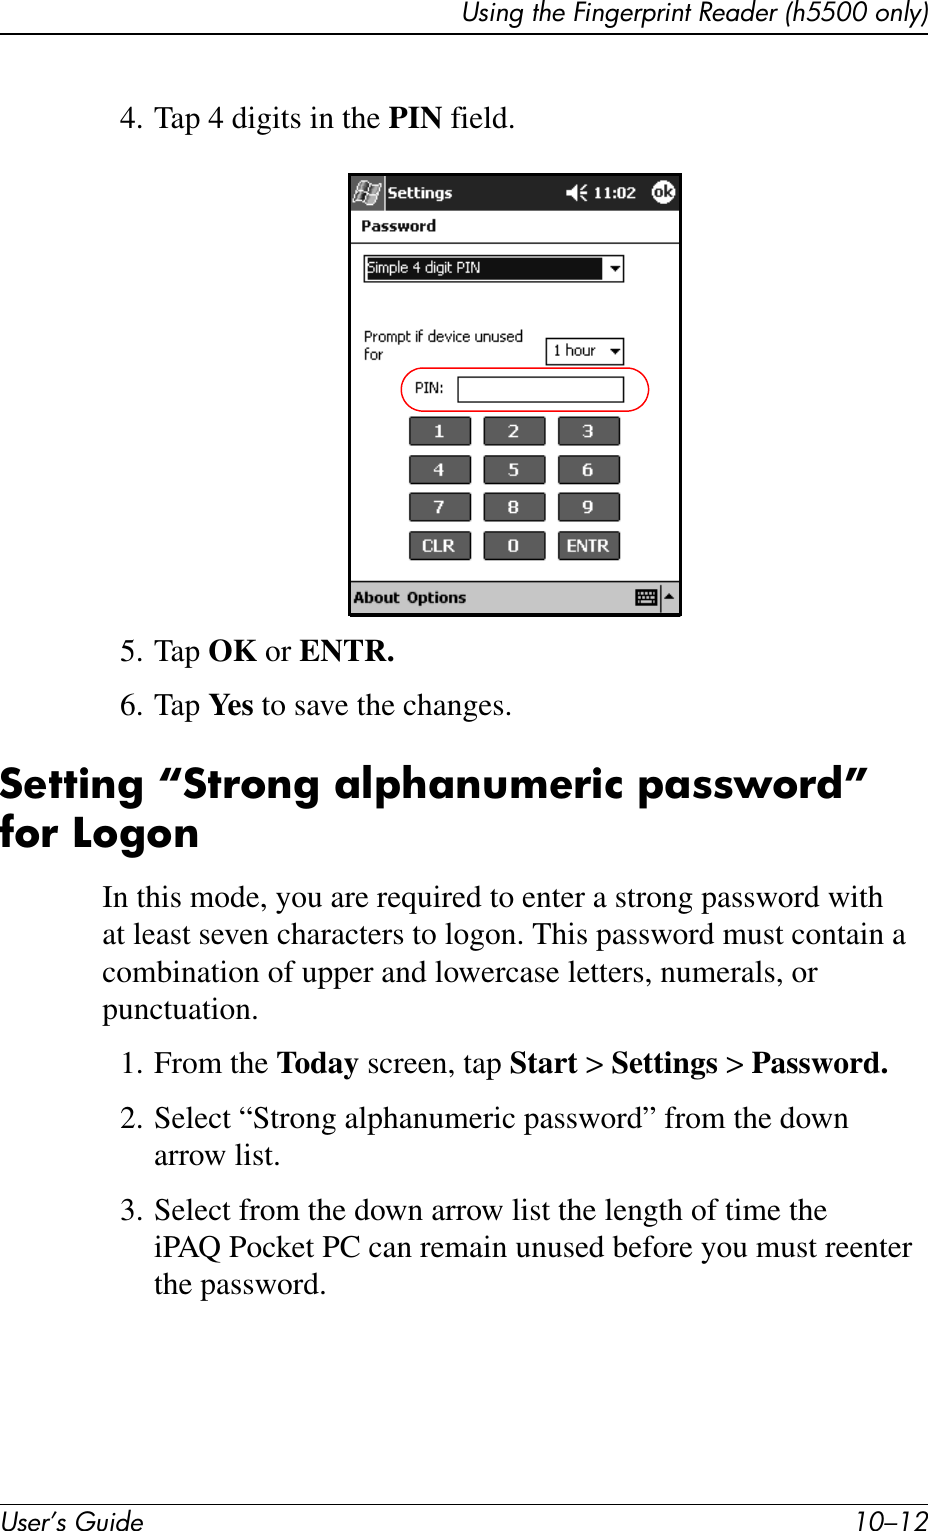 User’s Guide 10–12Using the Fingerprint Reader (h5500 only)4. Tap 4 digits in the PIN field.5. Tap OK or ENTR.6. Tap Ye s  to save the changes.Setting “Strong alphanumeric password” for LogonIn this mode, you are required to enter a strong password with at least seven characters to logon. This password must contain a combination of upper and lowercase letters, numerals, or punctuation.1. From the Today screen, tap Start &gt; Settings &gt; Password.2. Select “Strong alphanumeric password” from the down arrow list.3. Select from the down arrow list the length of time the iPAQ Pocket PC can remain unused before you must reenter the password.